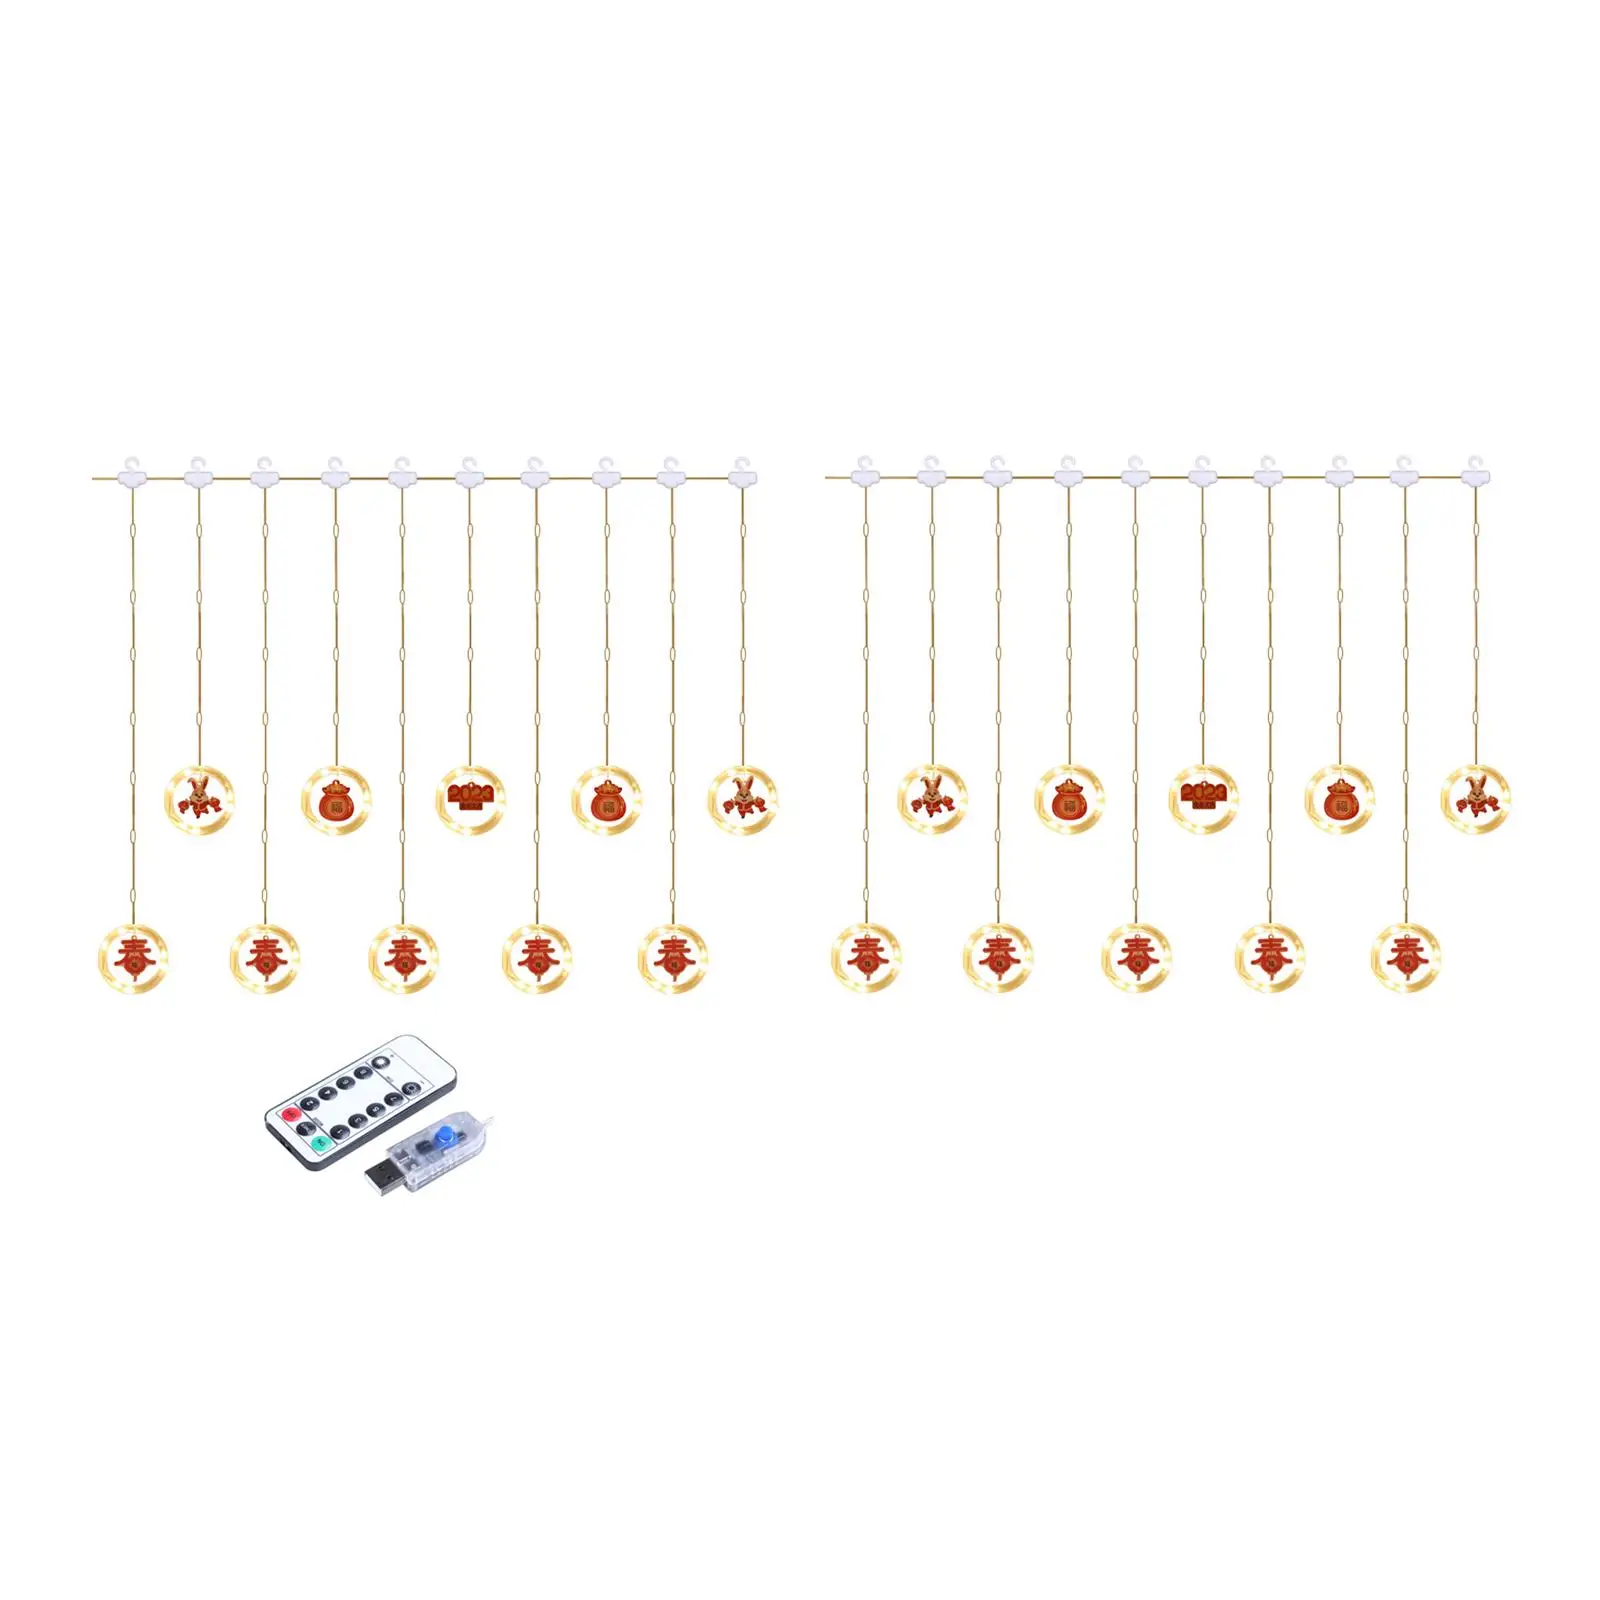 Spring Festival Icicle Light Hanging Light Lights IP44 Waterproof Ornament for Garden Roof Decoration